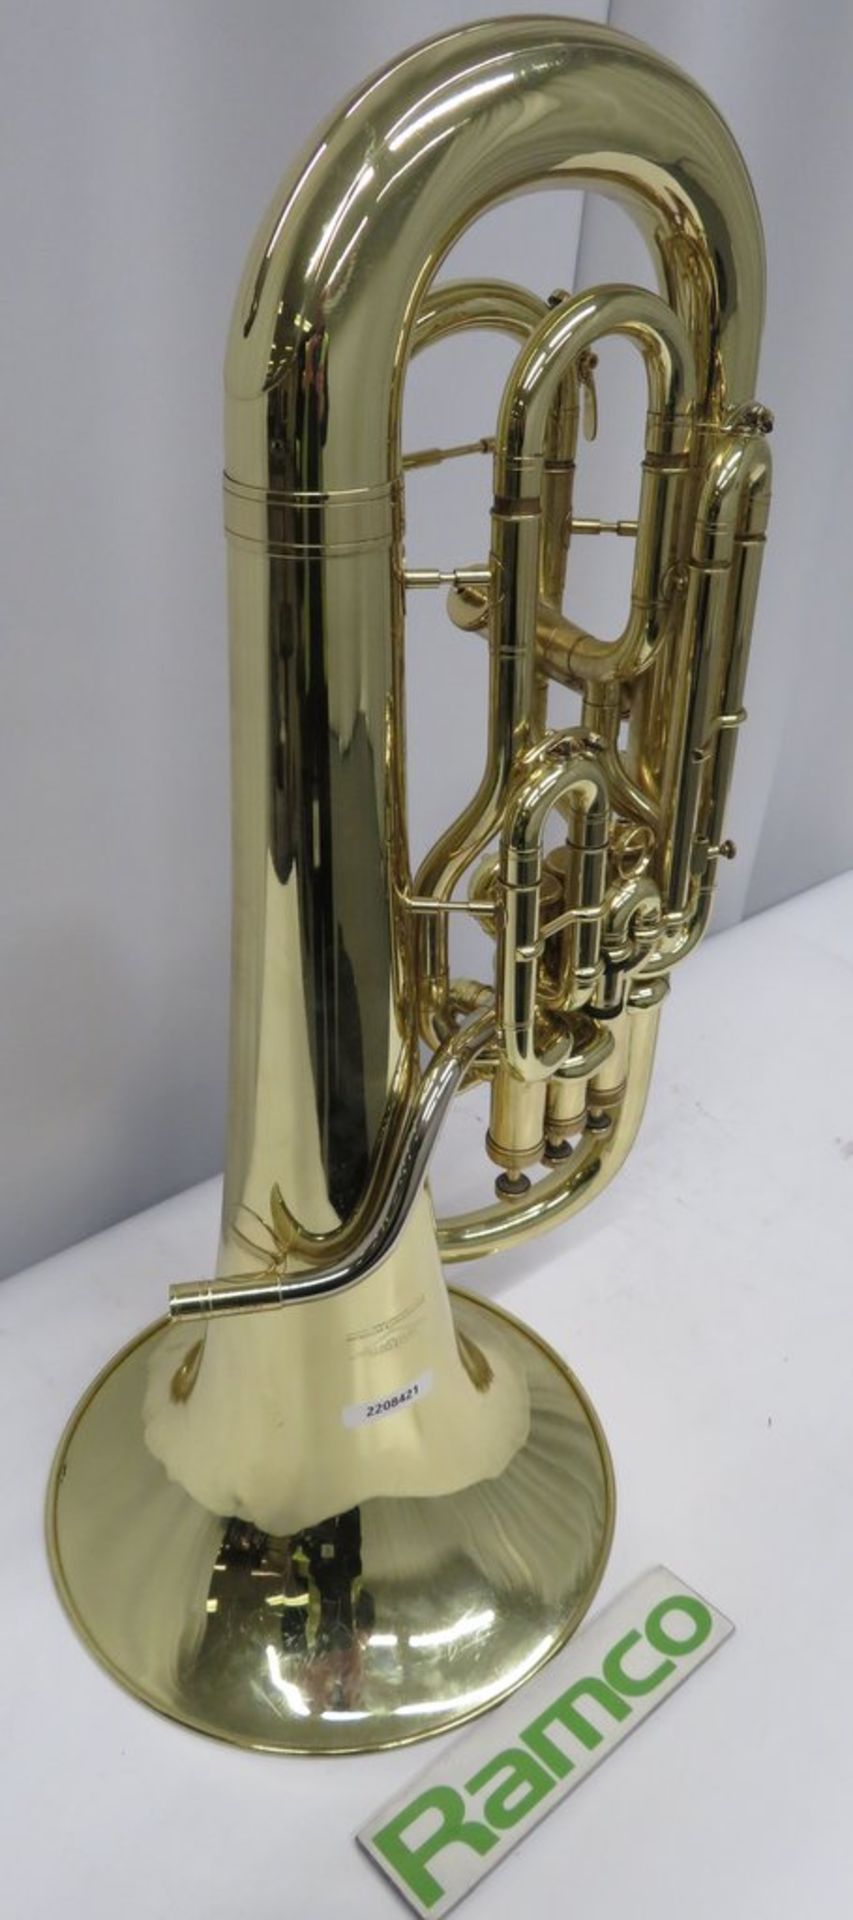 Wilson Euphonium With Case. Serial Number: 2950TA. Please Note This Item Has Not Been Test - Image 3 of 17